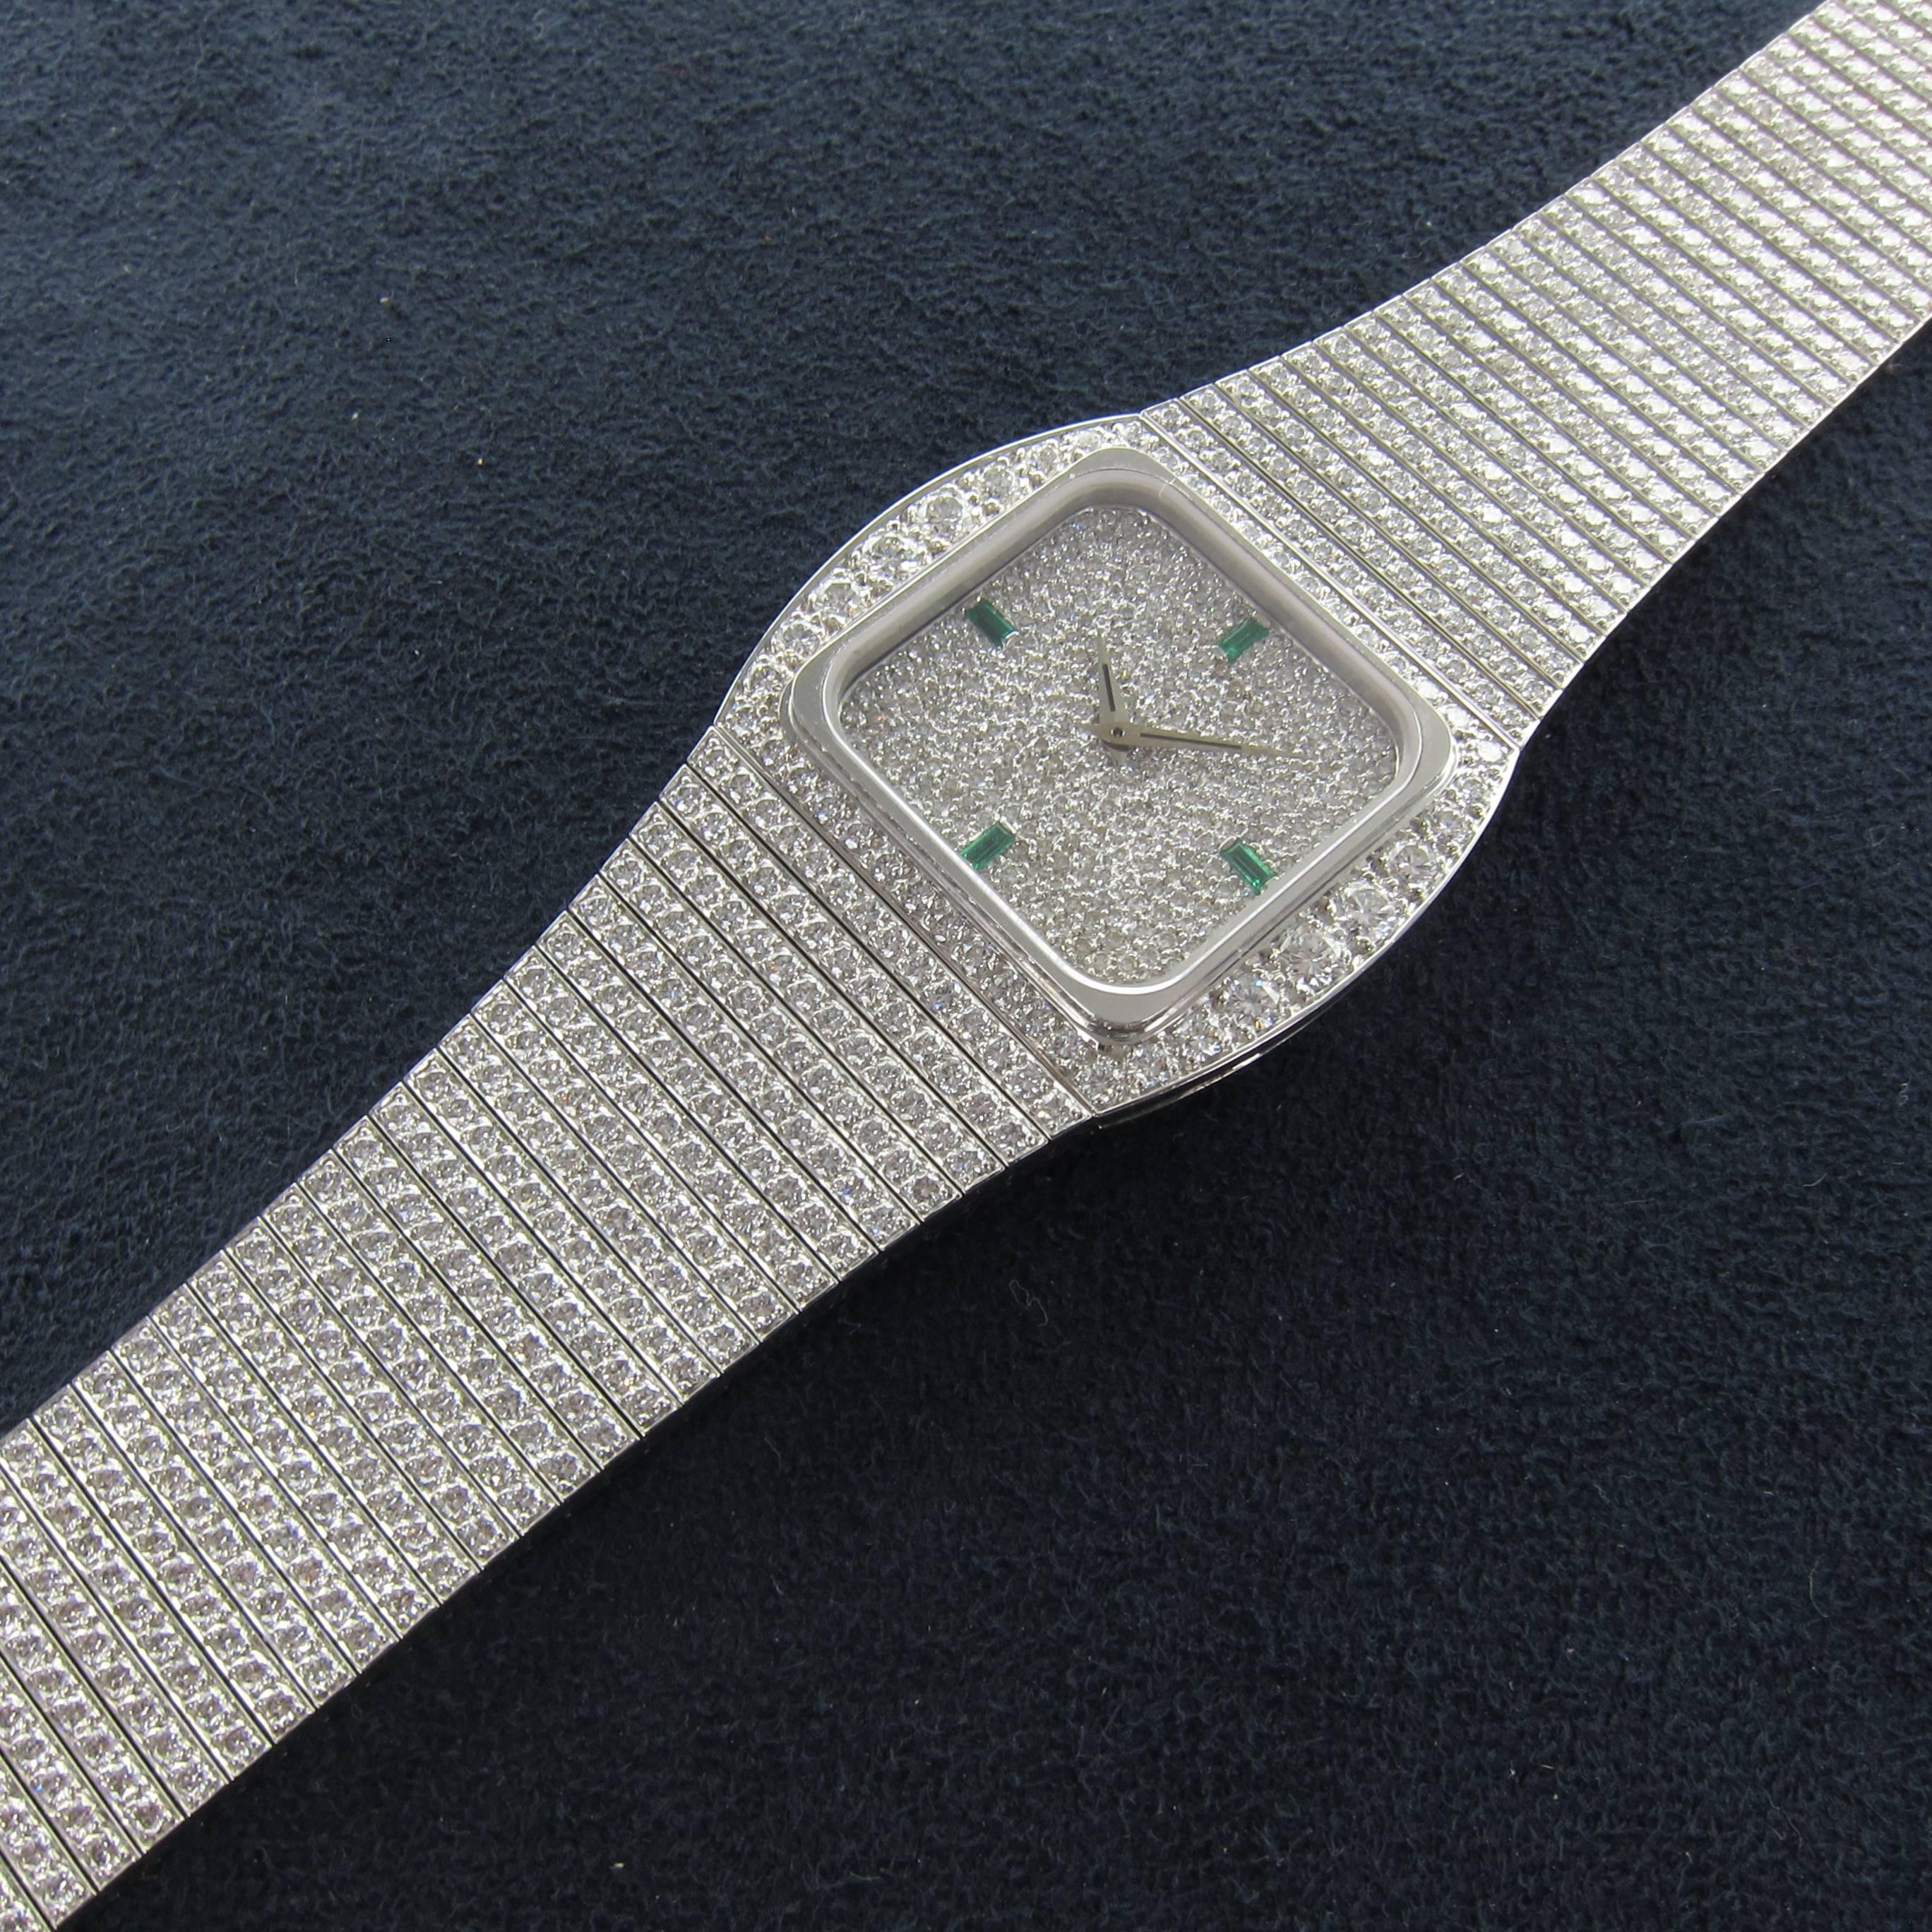 A Rare and Possibly Unique Patek Philippe Cushion-Shaped White Gold Diamond-Set Bracelet Watch with Emerald Markers and Dauphine Hands. 

Mechanical Movement

Reference 3636/1

29 X 34mm

Late 1970's